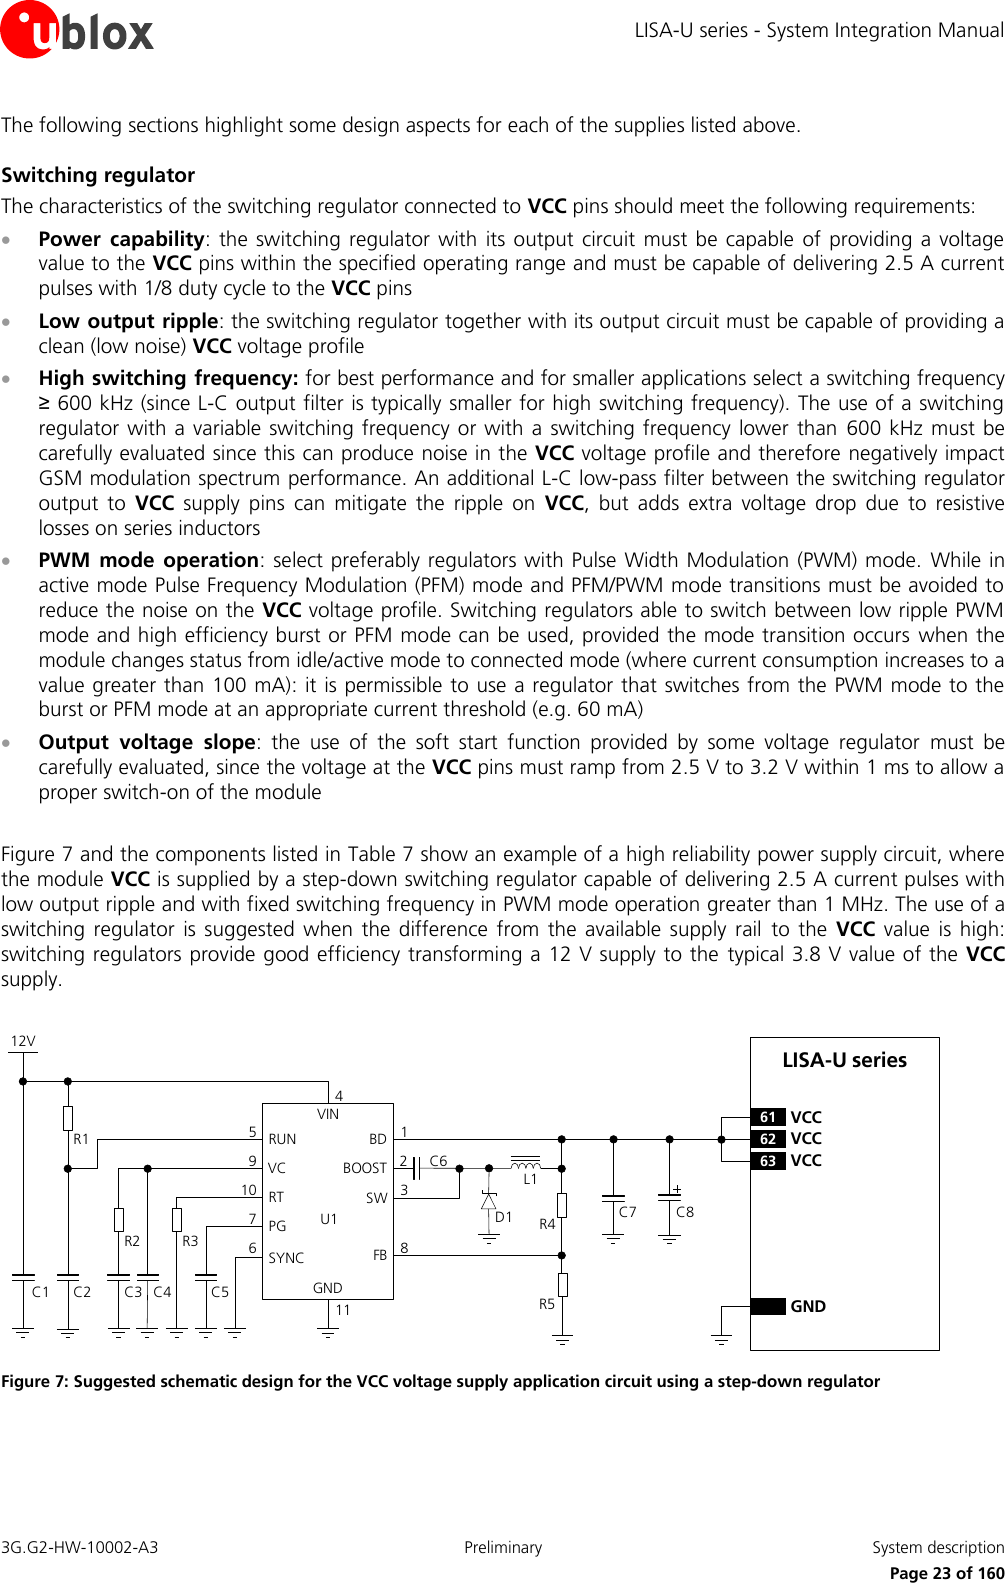 LISA-U series - System Integration Manual 3G.G2-HW-10002-A3  Preliminary  System description      Page 23 of 160 The following sections highlight some design aspects for each of the supplies listed above. Switching regulator The characteristics of the switching regulator connected to VCC pins should meet the following requirements:  Power  capability:  the switching  regulator with  its output circuit must  be capable of  providing a  voltage value to the VCC pins within the specified operating range and must be capable of delivering 2.5 A current pulses with 1/8 duty cycle to the VCC pins  Low output ripple: the switching regulator together with its output circuit must be capable of providing a clean (low noise) VCC voltage profile  High switching frequency: for best performance and for smaller applications select a switching frequency ≥ 600 kHz (since L-C output filter is typically smaller for high switching frequency). The use of a switching regulator with a variable switching frequency  or  with a switching  frequency lower  than  600 kHz must be carefully evaluated since this can produce noise in the VCC voltage profile and therefore negatively impact GSM modulation spectrum performance. An additional L-C low-pass filter between the switching regulator output  to  VCC  supply  pins  can  mitigate  the  ripple  on  VCC,  but  adds  extra  voltage  drop  due  to  resistive losses on series inductors  PWM  mode  operation: select preferably regulators with Pulse Width Modulation (PWM) mode.  While in active mode Pulse Frequency Modulation (PFM) mode and PFM/PWM mode transitions must be avoided to reduce the noise on the VCC voltage profile. Switching regulators able to switch between low ripple PWM mode and high efficiency burst or PFM mode can be used, provided the mode transition occurs  when the module changes status from idle/active mode to connected mode (where current consumption increases to a value greater than 100 mA): it is permissible to use a regulator that switches from the PWM mode to the burst or PFM mode at an appropriate current threshold (e.g. 60 mA)  Output  voltage  slope:  the  use  of  the  soft  start  function  provided  by  some  voltage  regulator  must  be carefully evaluated, since the voltage at the VCC pins must ramp from 2.5 V to 3.2 V within 1 ms to allow a proper switch-on of the module   Figure 7 and the components listed in Table 7 show an example of a high reliability power supply circuit, where the module VCC is supplied by a step-down switching regulator capable of delivering 2.5 A current pulses with low output ripple and with fixed switching frequency in PWM mode operation greater than 1 MHz. The use of a switching  regulator  is suggested  when the  difference  from  the  available supply  rail  to  the  VCC  value  is  high: switching regulators provide good efficiency transforming a 12 V supply to the  typical 3.8 V value of the  VCC supply.  LISA-U series12VC5R3C4R2C2C1R1VINRUNVCRTPGSYNCBDBOOSTSWFBGND671095C61238114C7 C8D1 R4R5L1C3U162 VCC63 VCC61 VCCGND Figure 7: Suggested schematic design for the VCC voltage supply application circuit using a step-down regulator 